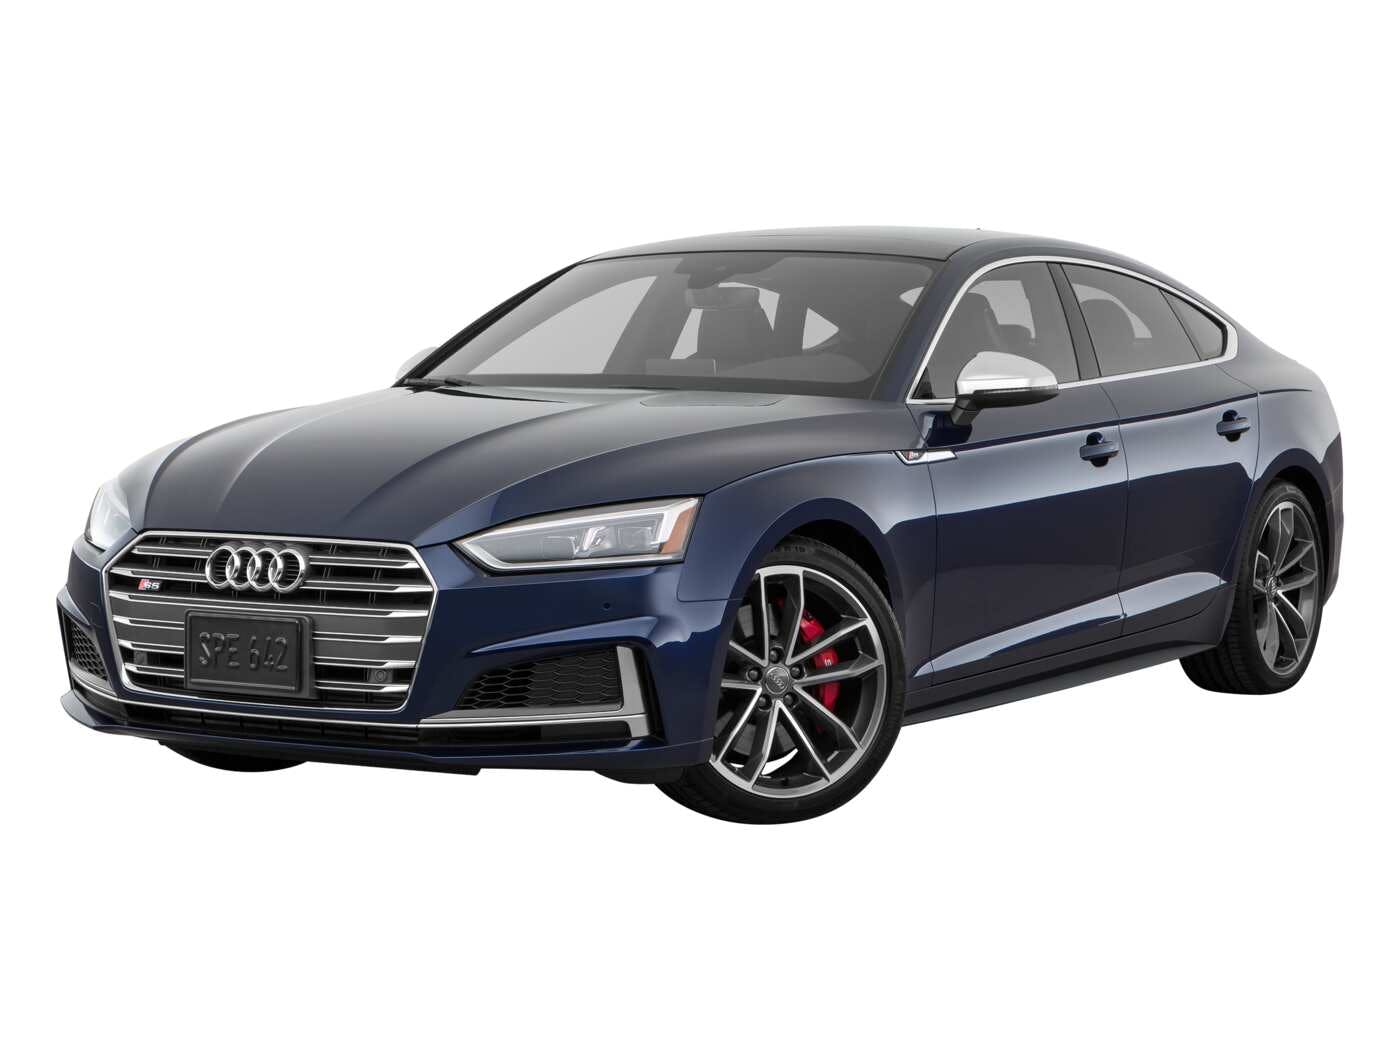 Review: 2019 Audi S5 Sportback is classy motoring